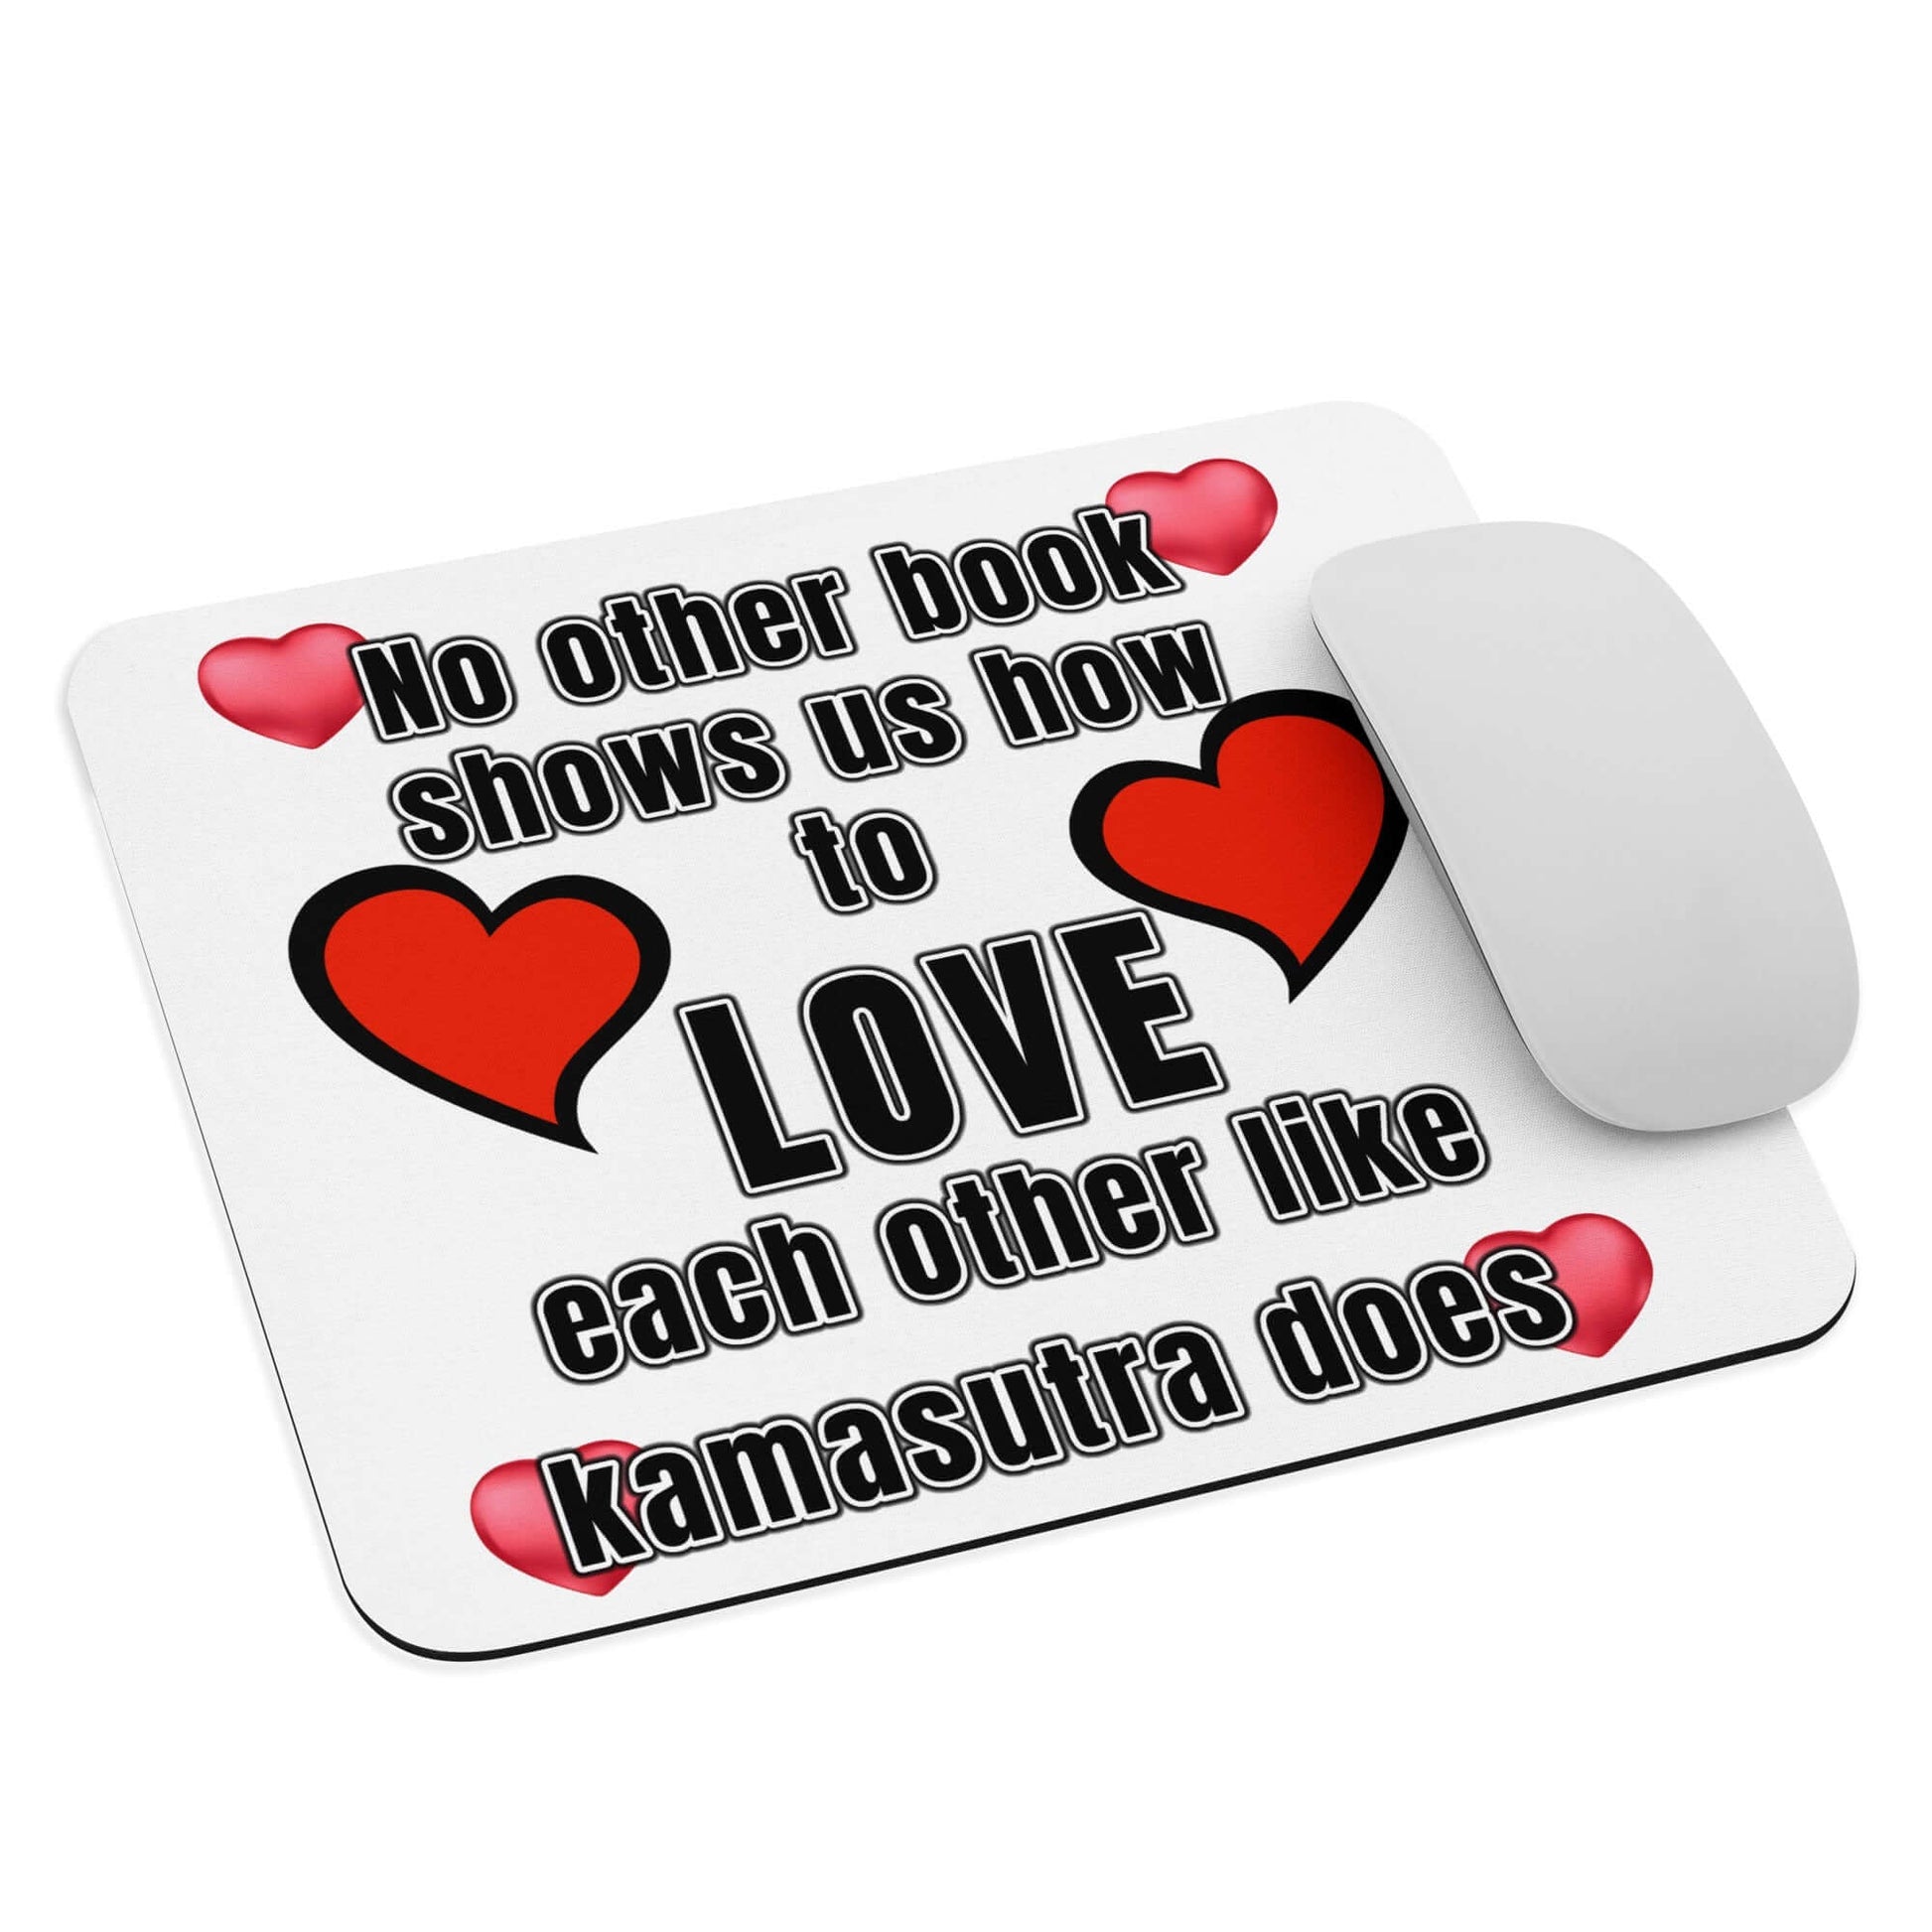 No other book shows us how to love each other like the Kamasutra does - Mouse pad - Horrible Designs